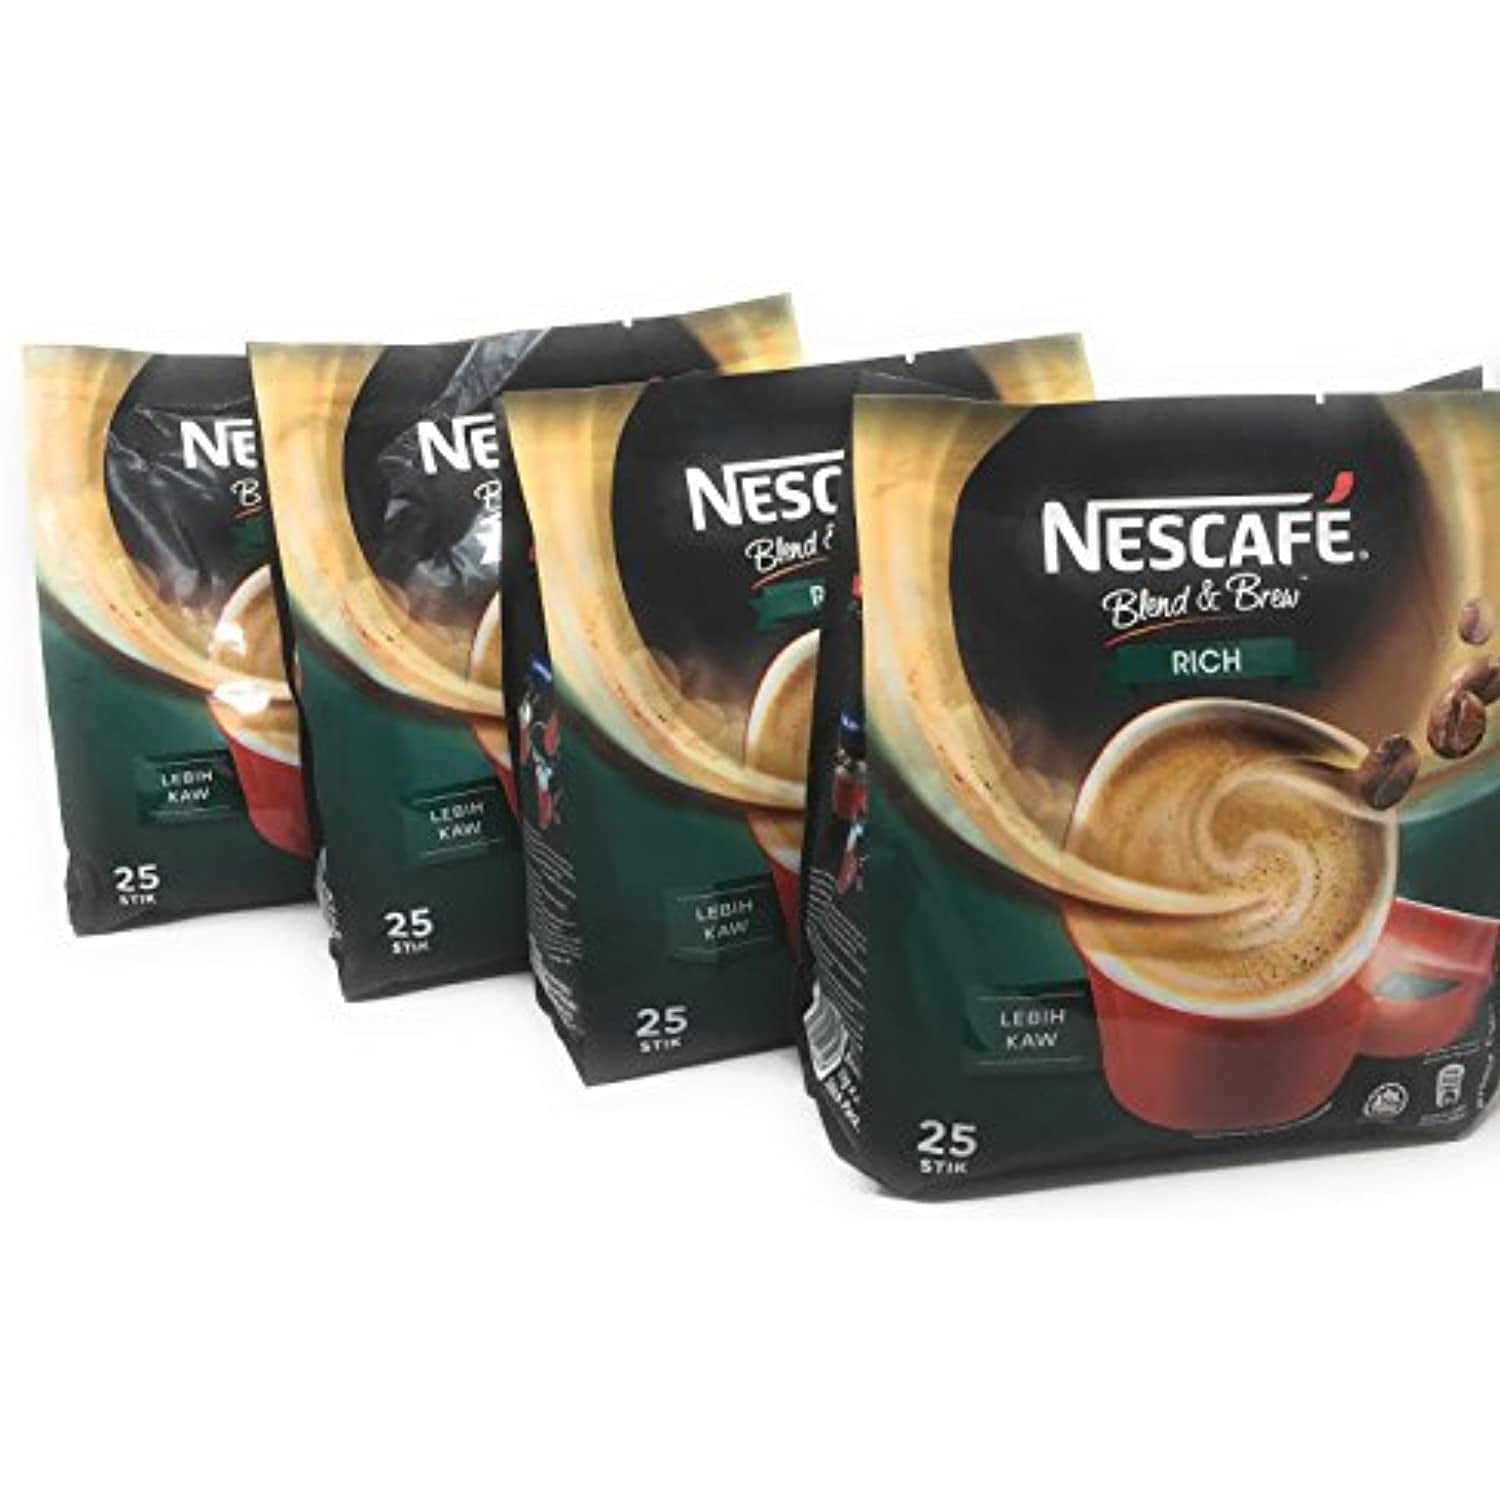 Nescafé 3 in 1 RICH Instant Coffee (25 Sticks) Made from Premium Quality  Beans H 